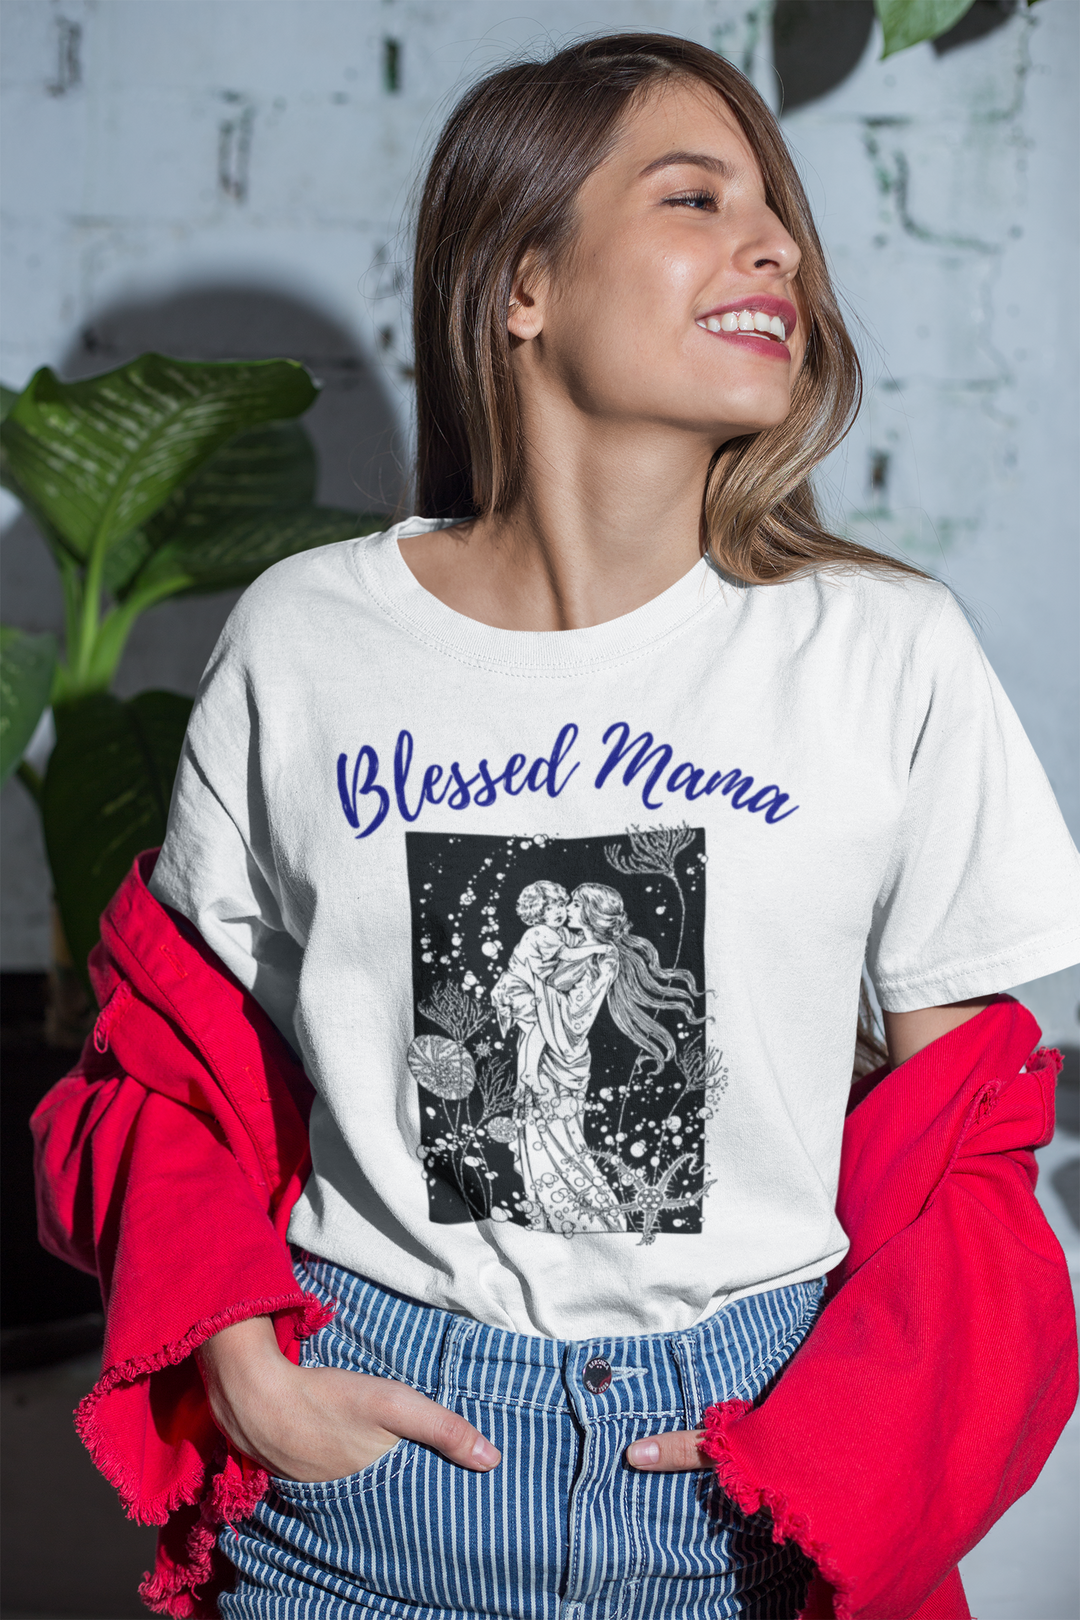 Blessed mama. Mother and child II. Short sleeve t shirt for mamas. - TeesForToddlersandKids -  t-shirt - MAMA - blessed-mama-mother-and-child-ii-short-sleeve-t-shirt-for-mamas-1